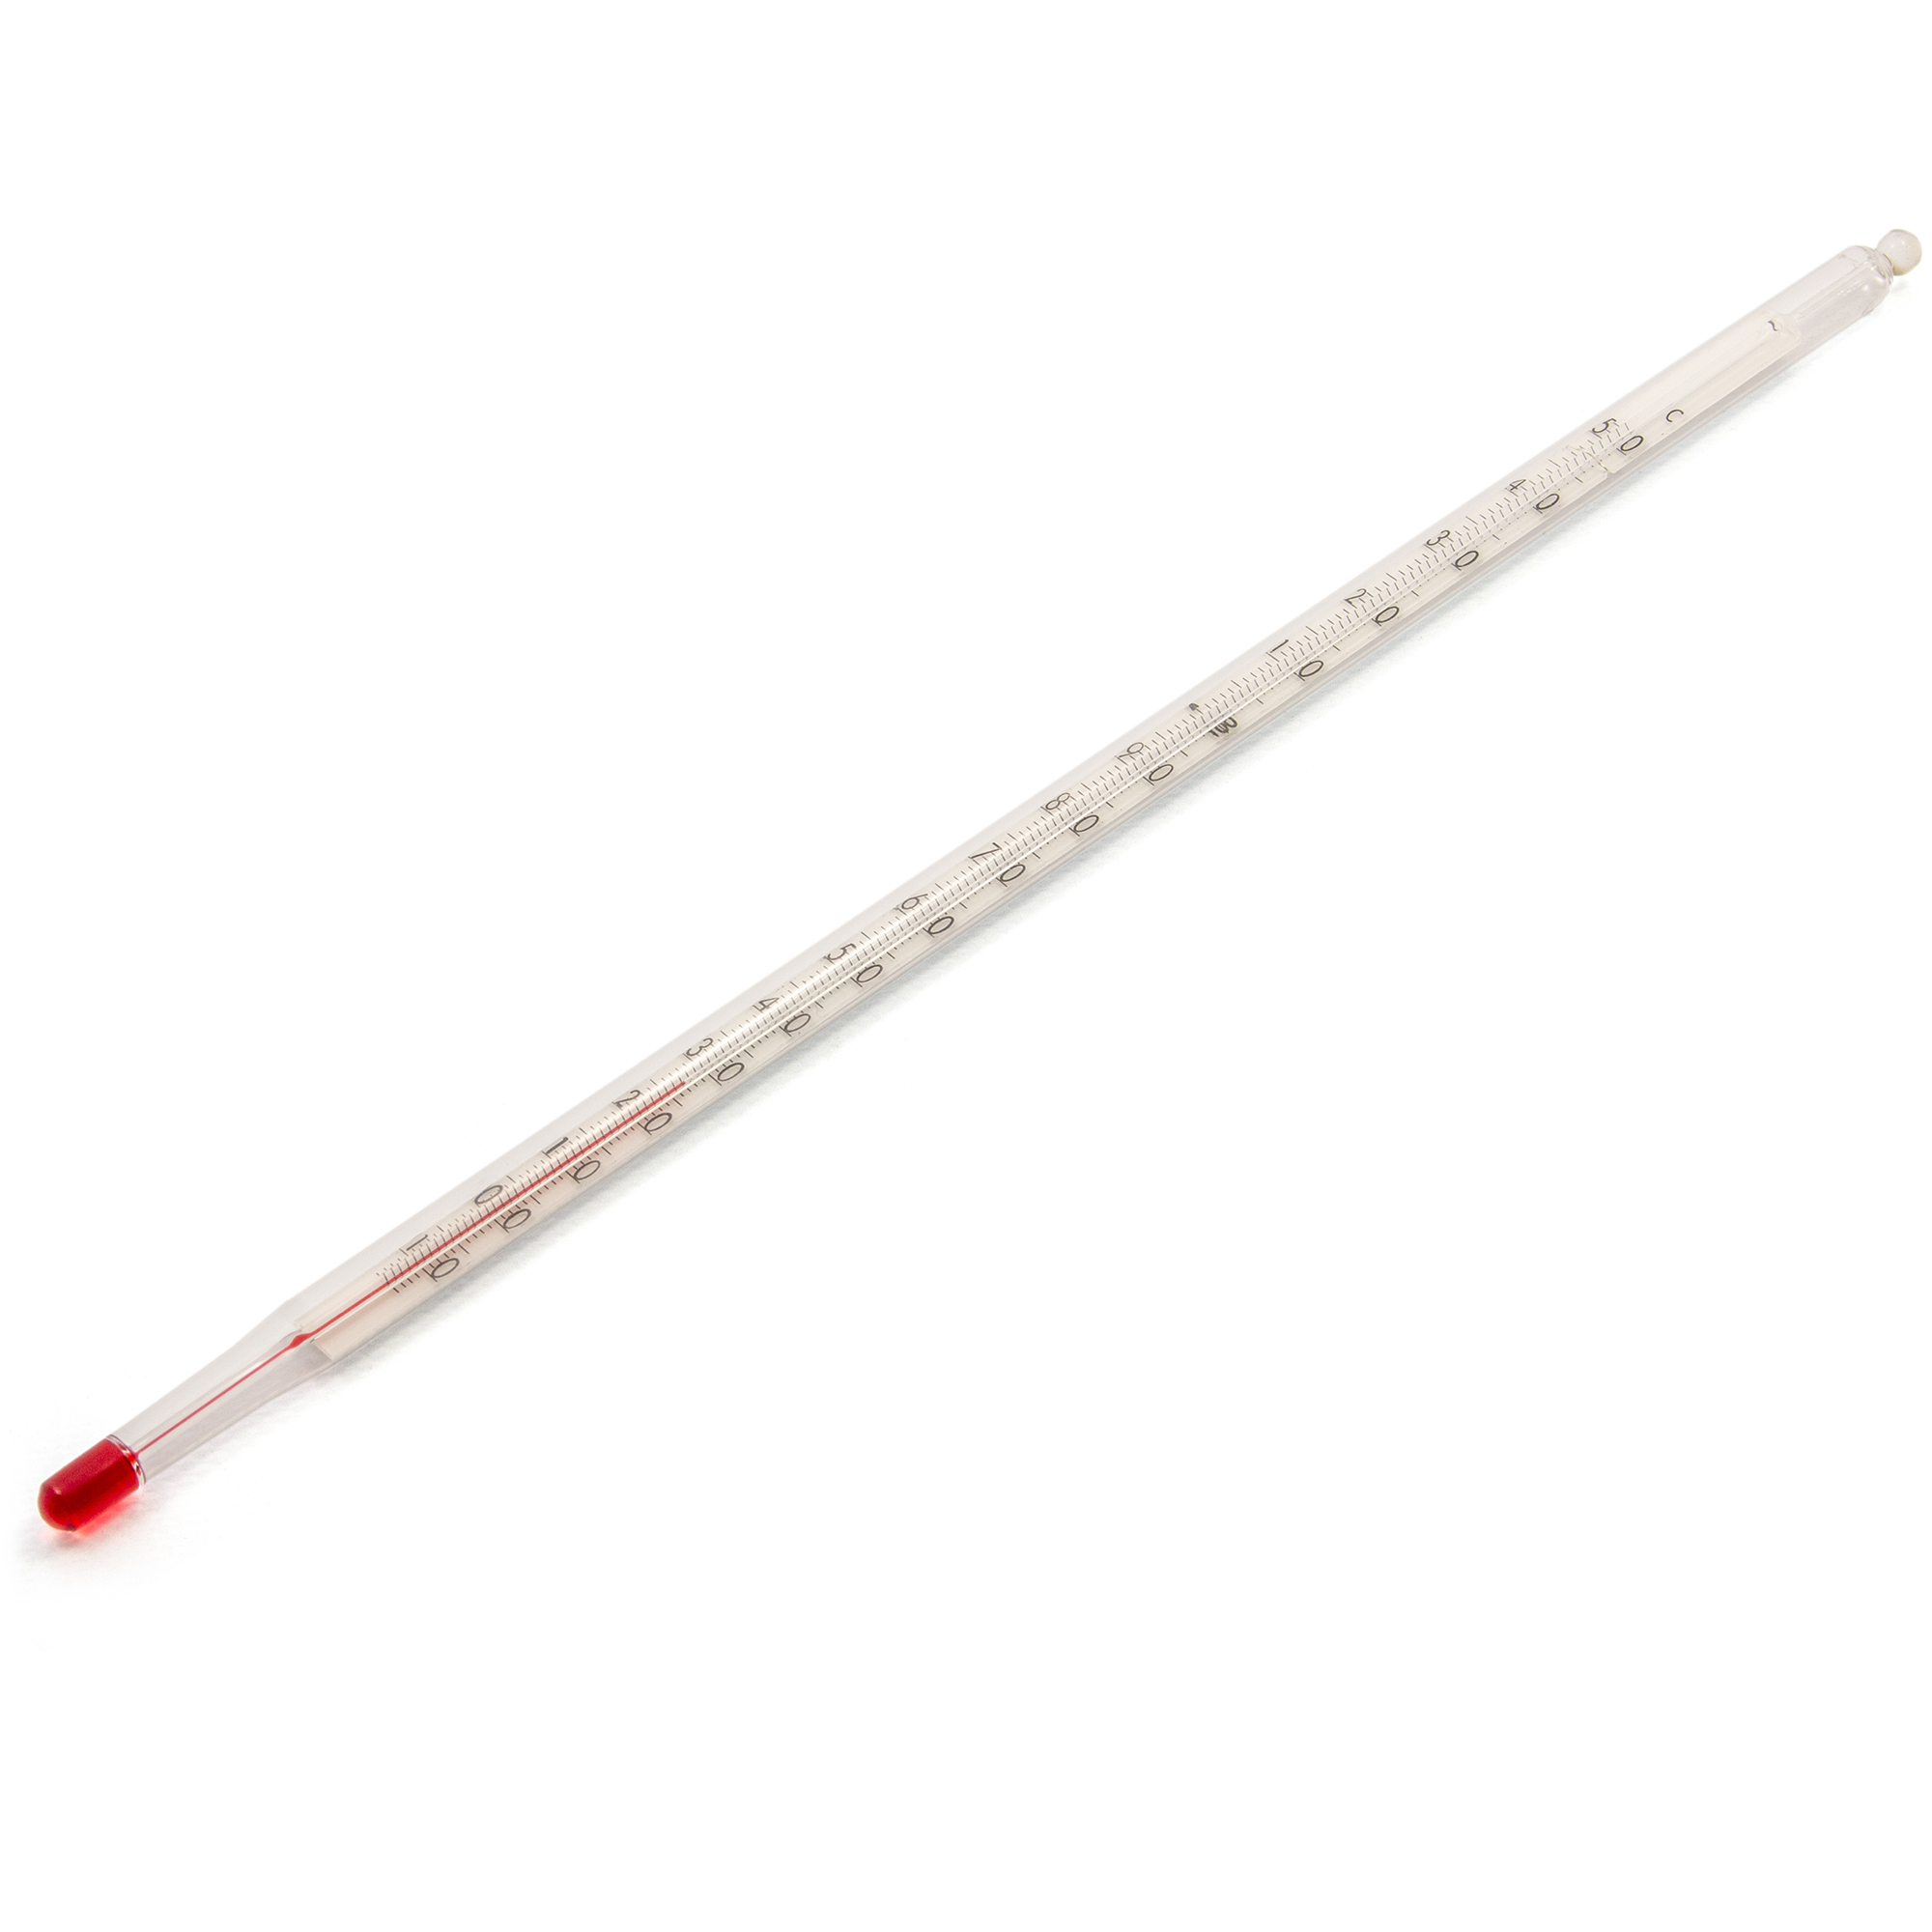 Precision thermometer glass with DKD calibration certificate